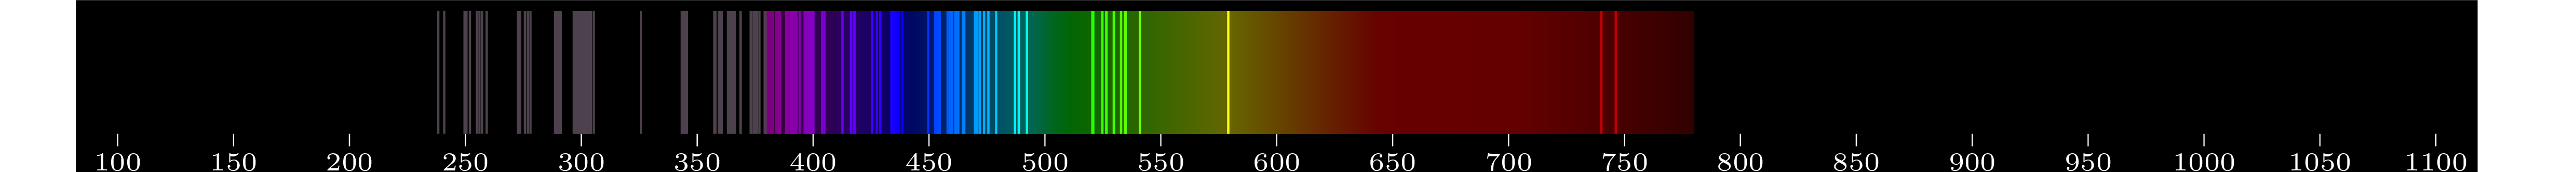 emmision spectra of element Cr